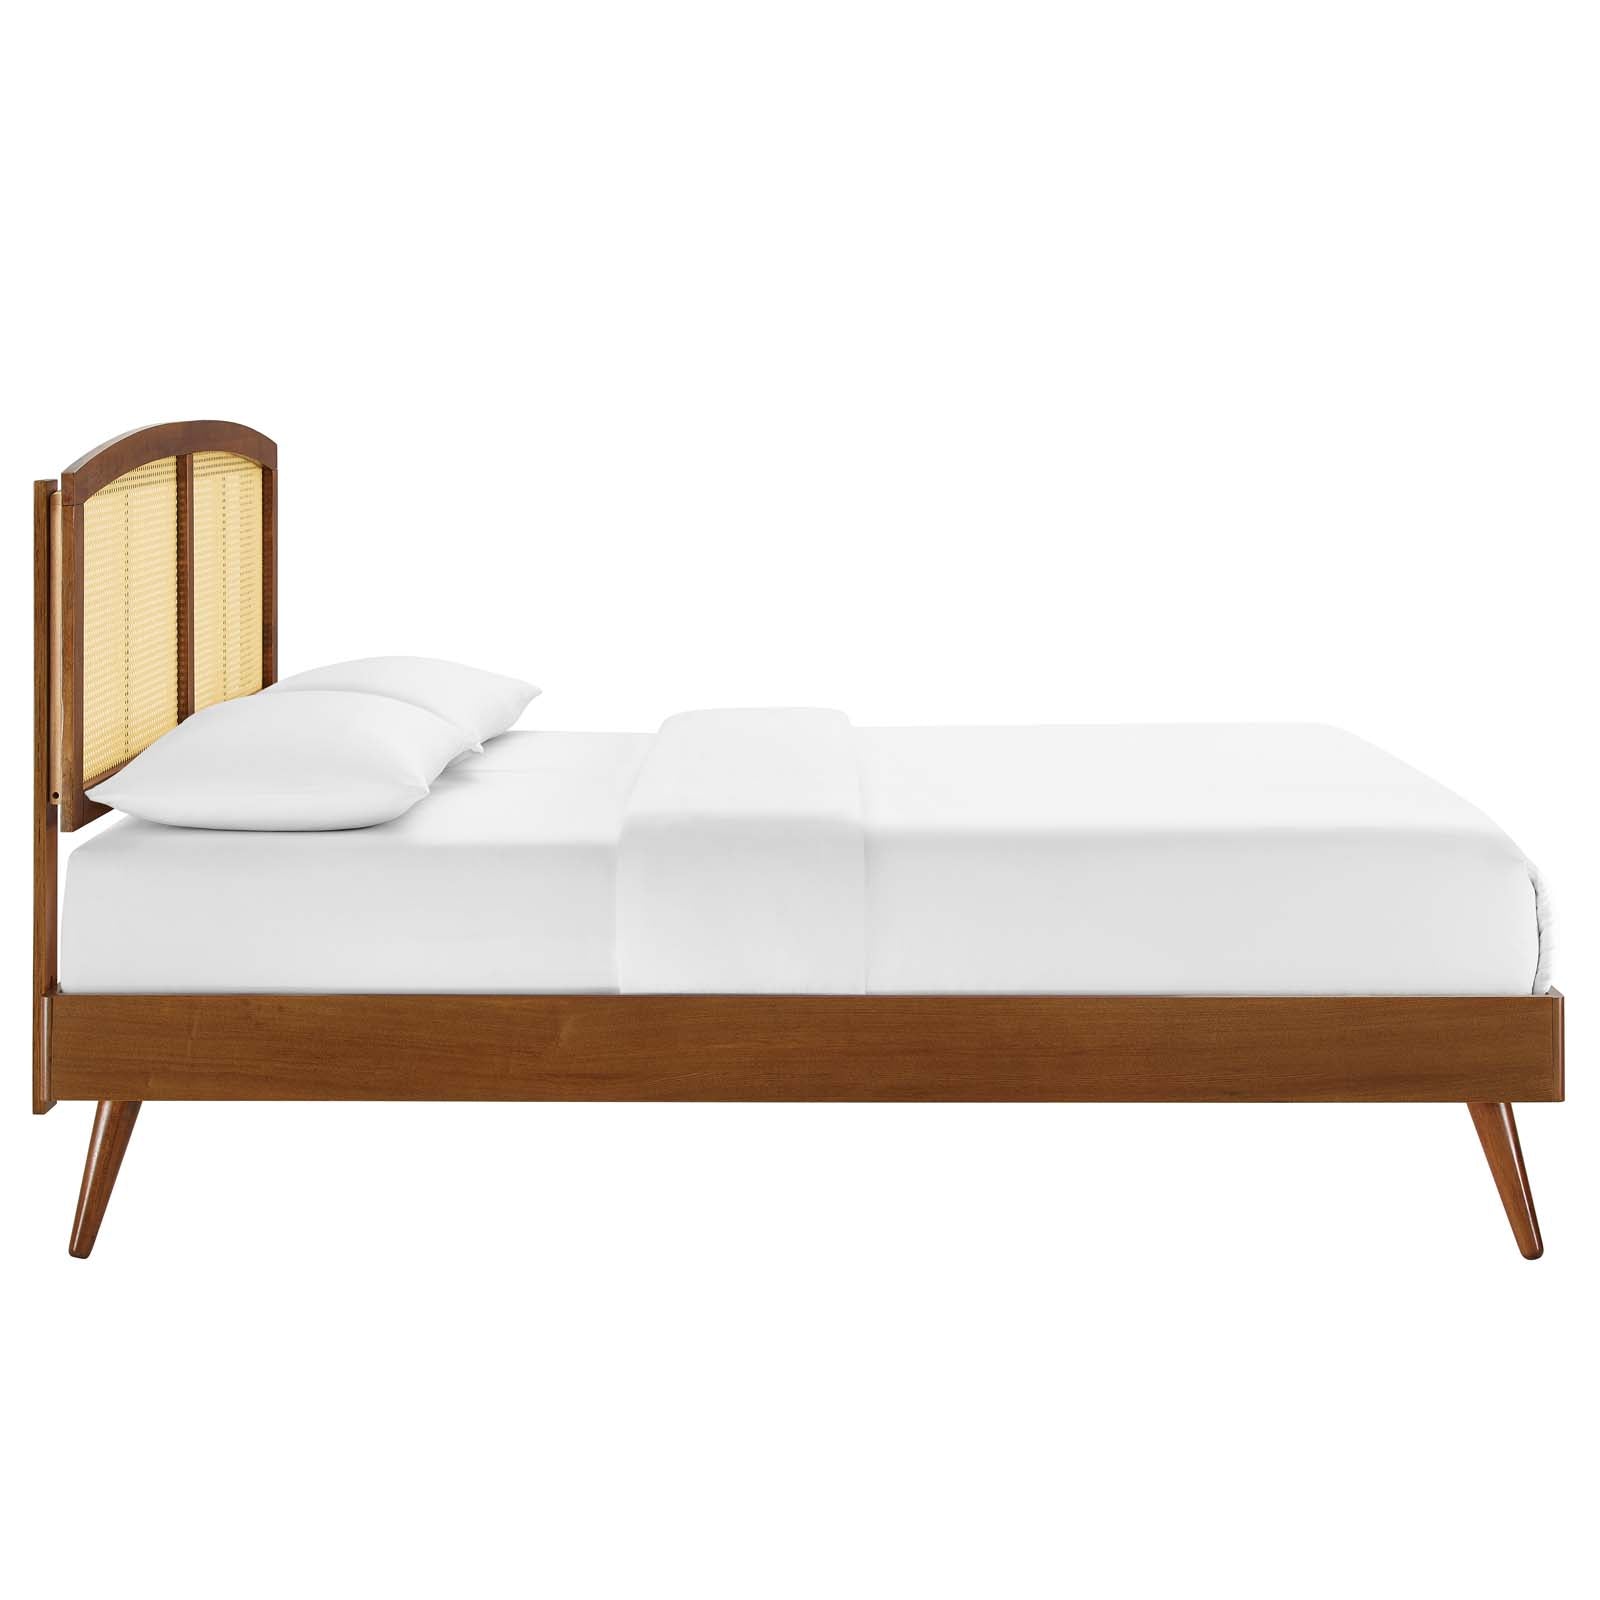 Sierra Cane and Wood King Platform Bed With Splayed Legs